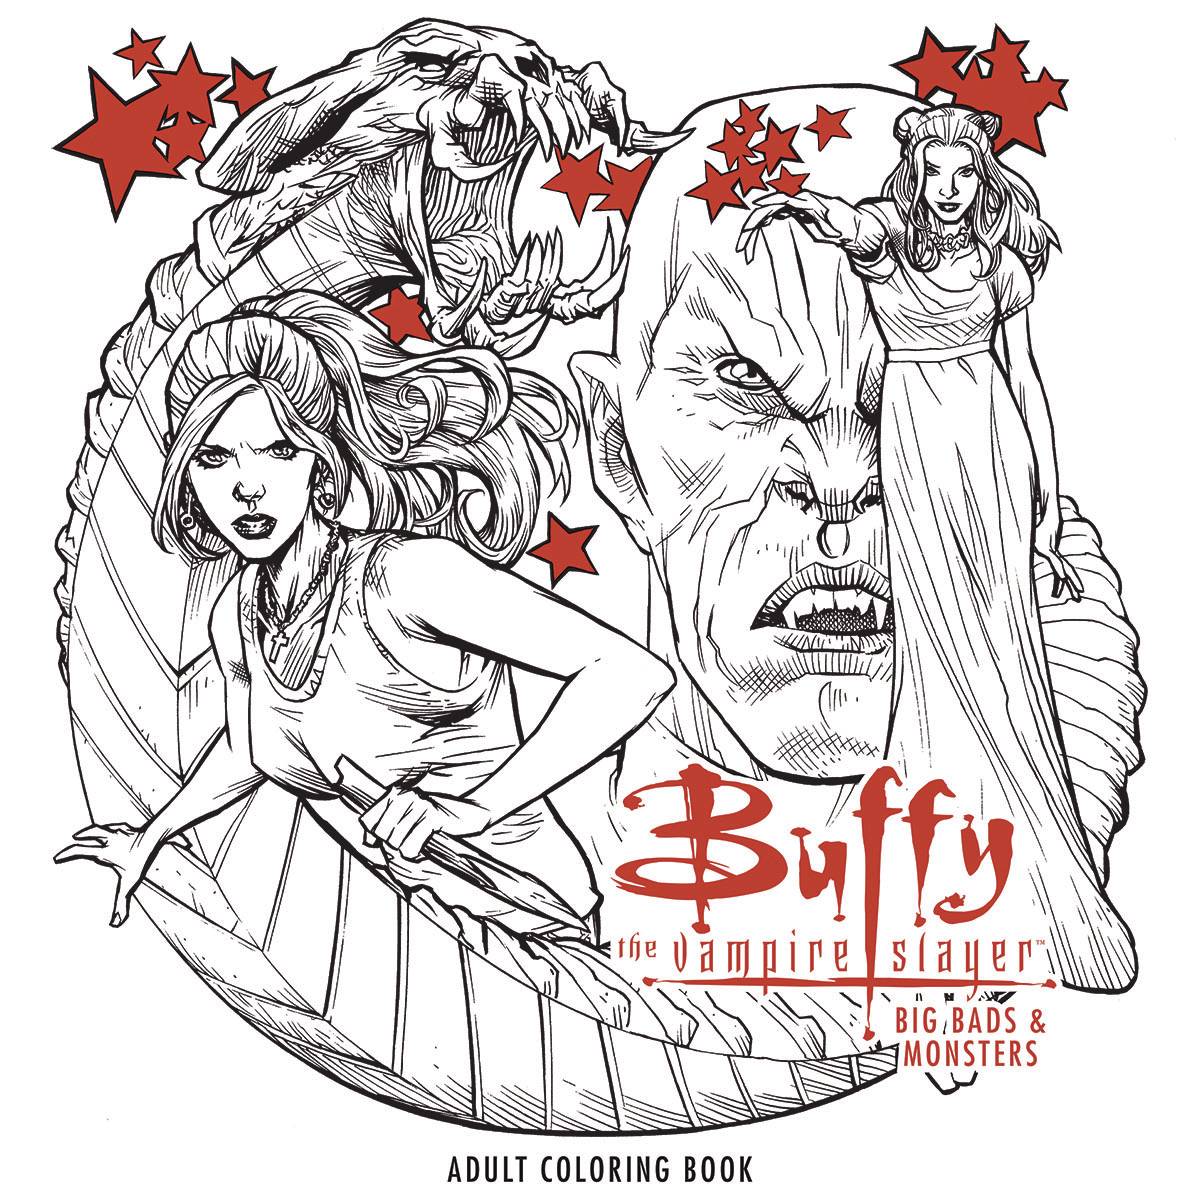 Buffy the Vampire Slayer Big Bads & Monsters Adult Coloring Book Graphic Novel